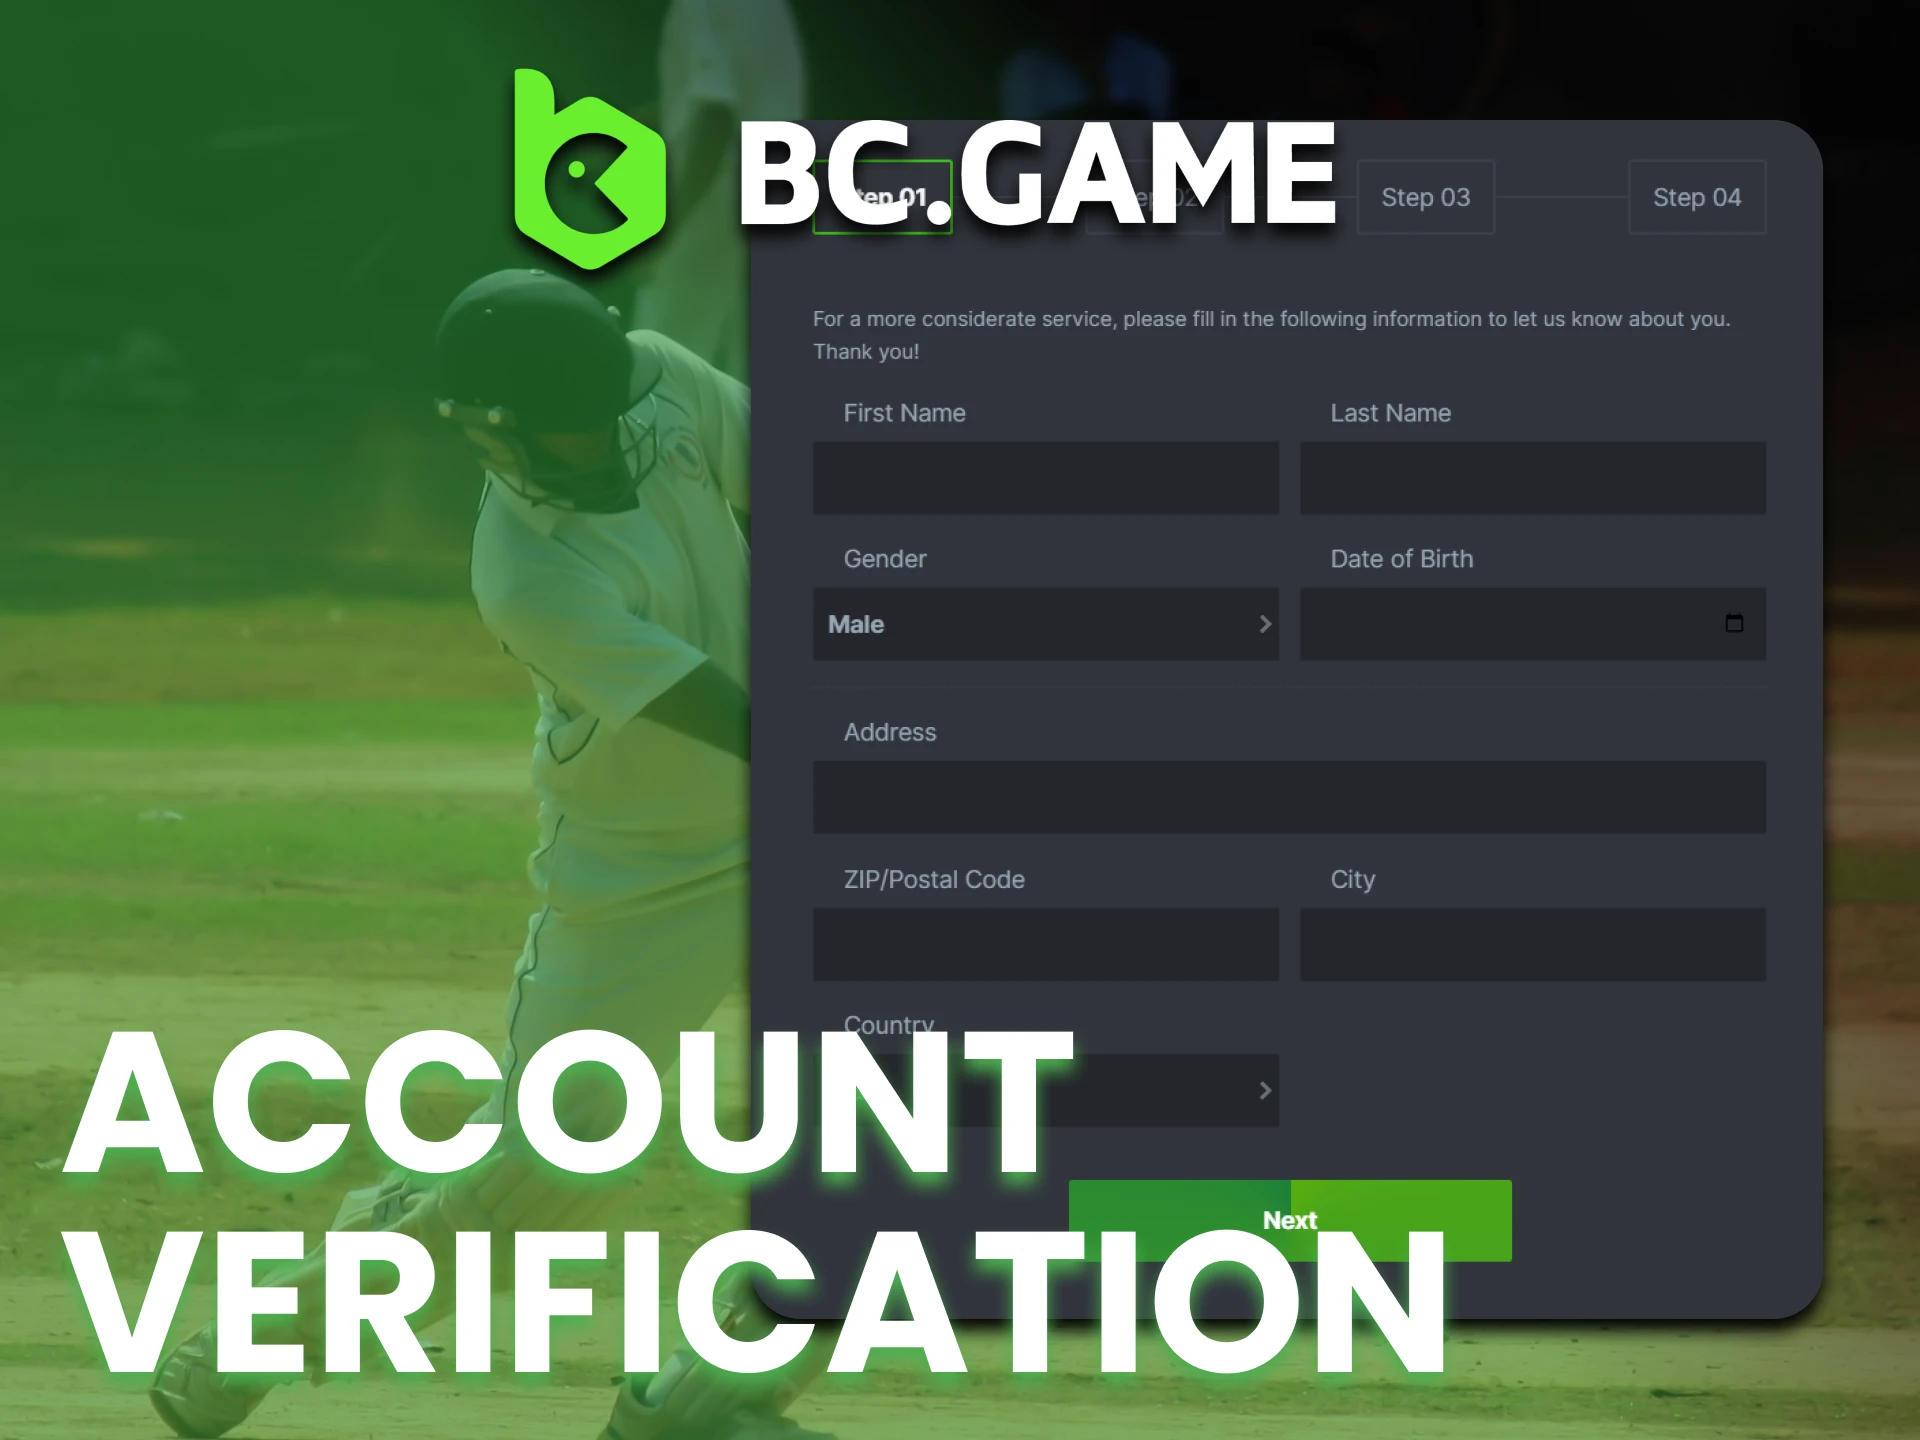 Verify your BC Game account by providing data.